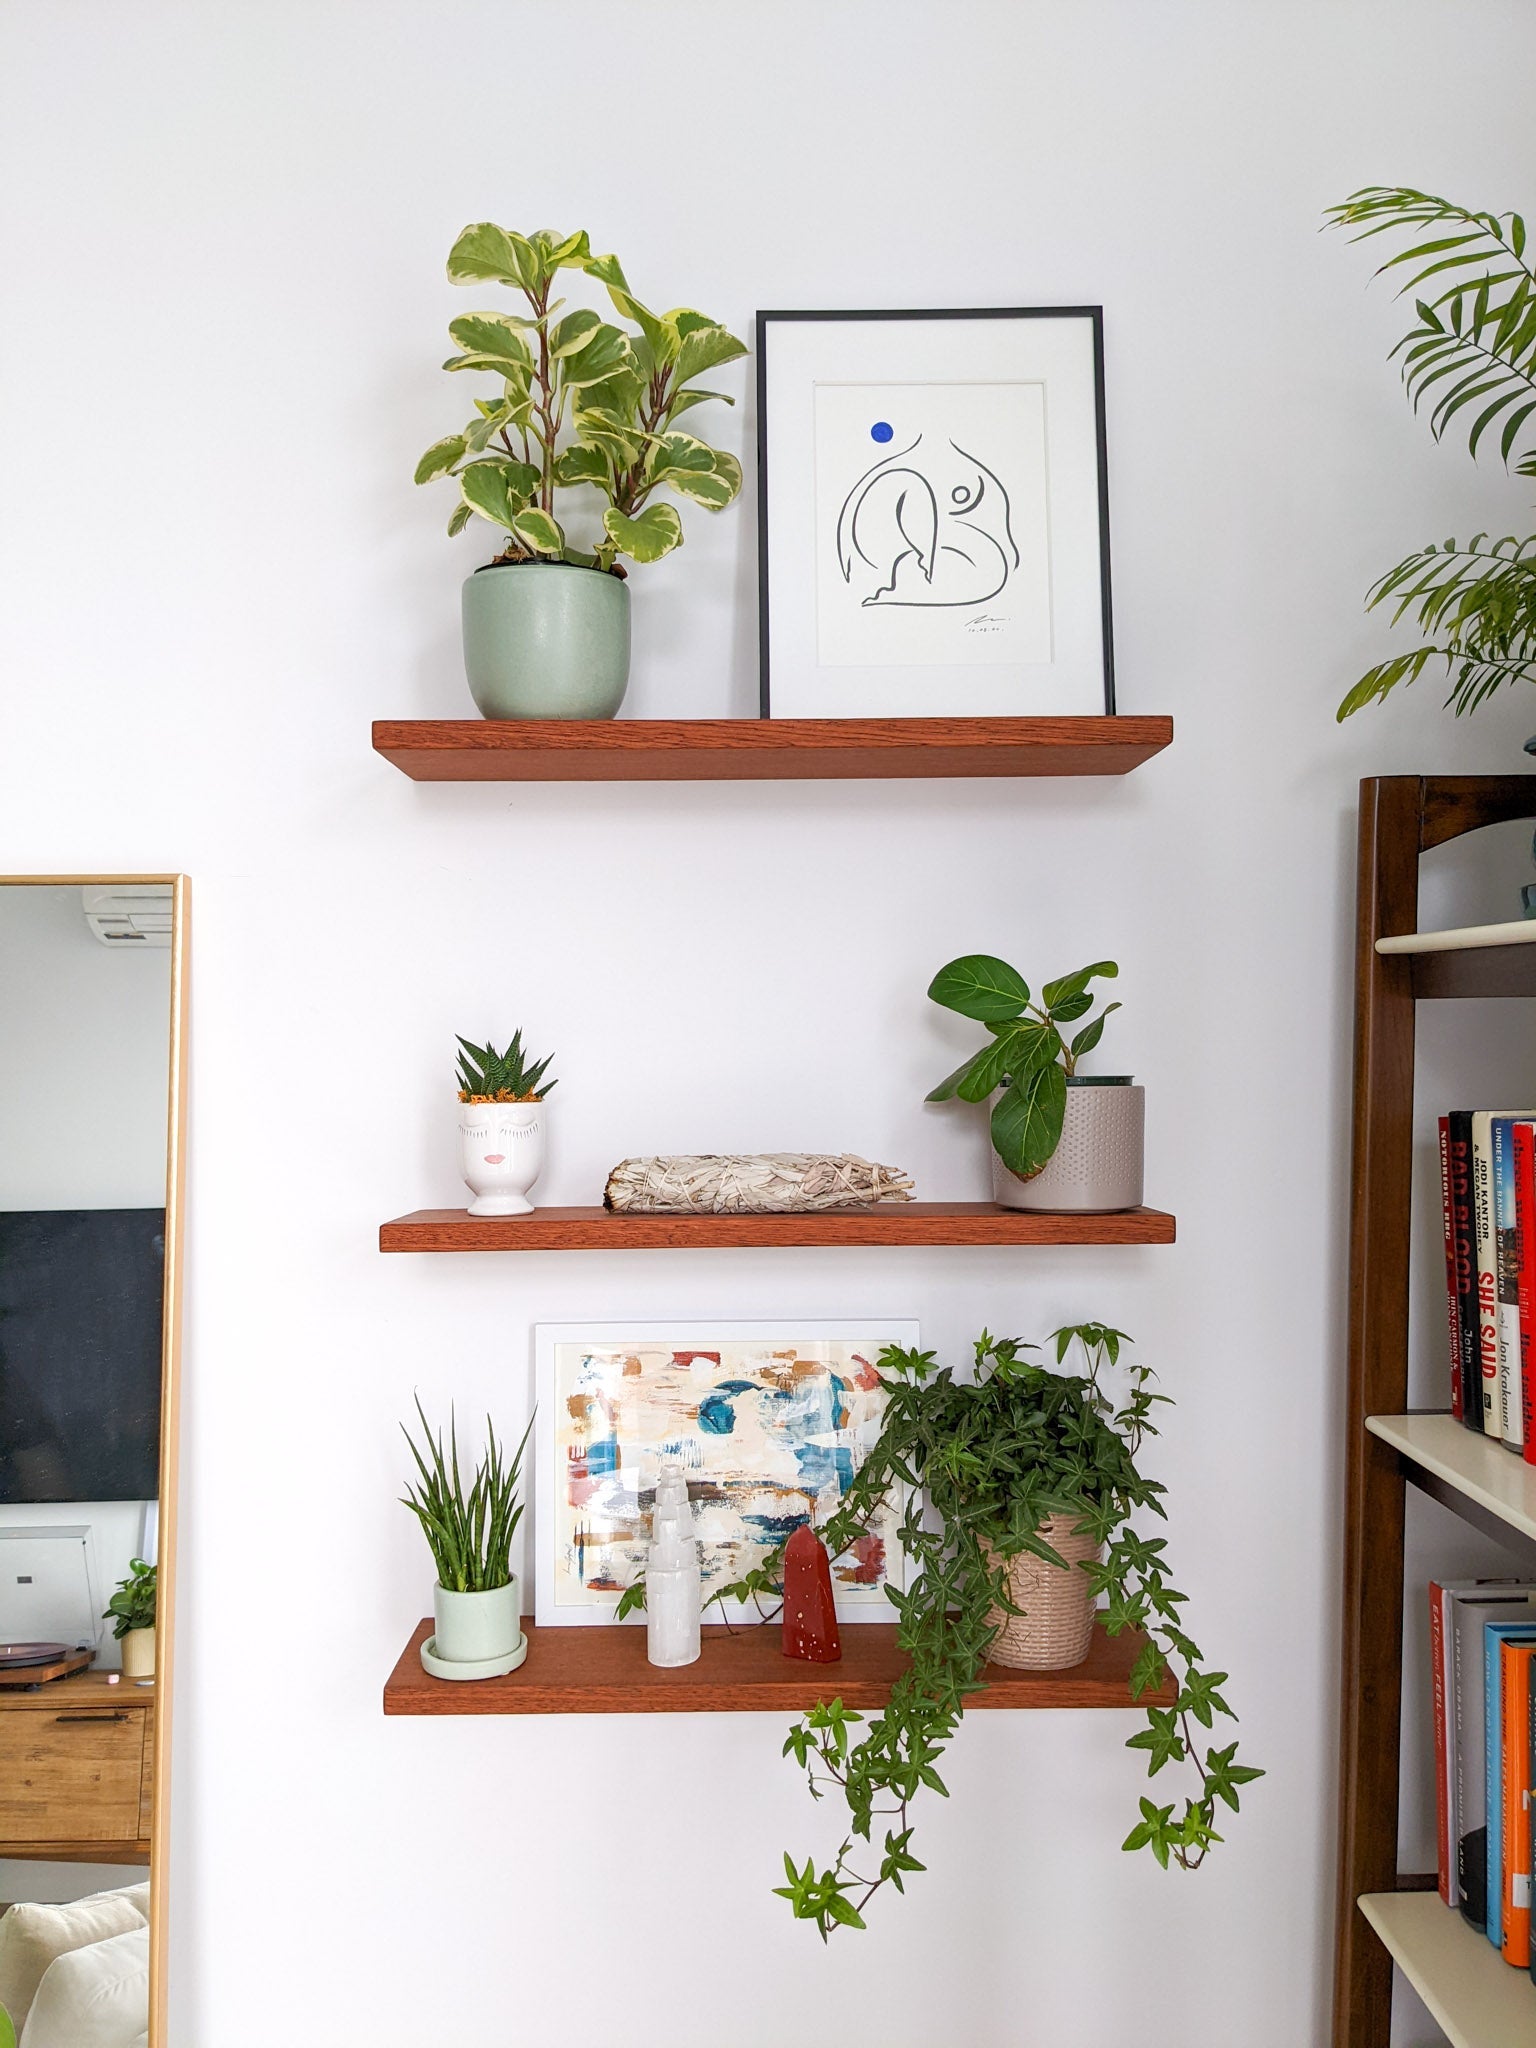 Three medium sized mahogany floating shelves are stacked on top of the other. The highest shelf holds a rubber plant in a blue planter and an impressionist painting; the middle shelf holds a succulent in a novelty face planter, a white sage stick, and a small ficus in a gray pot; and the lowest shelf holds a fern and pickle plant and two crystal stalagmites.